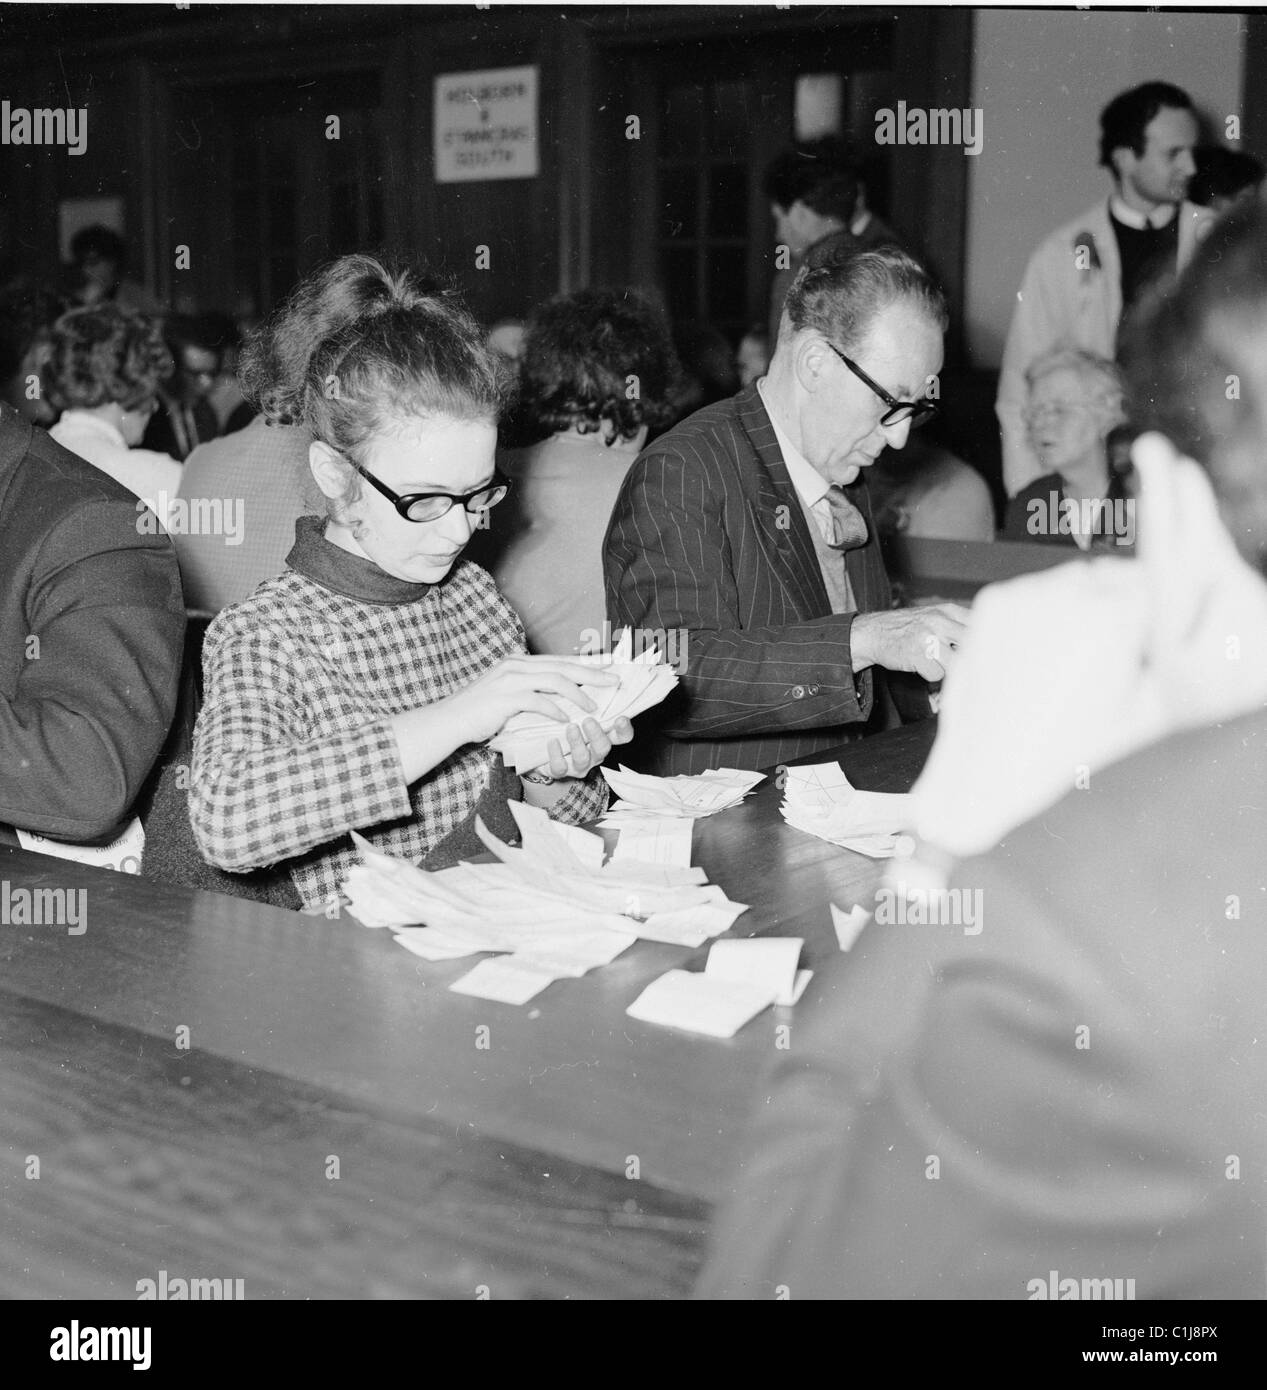 1964, male and female voting officers checking ballot papers at a voting hall during a political election at St Pancras North, London, England, UK. Stock Photo